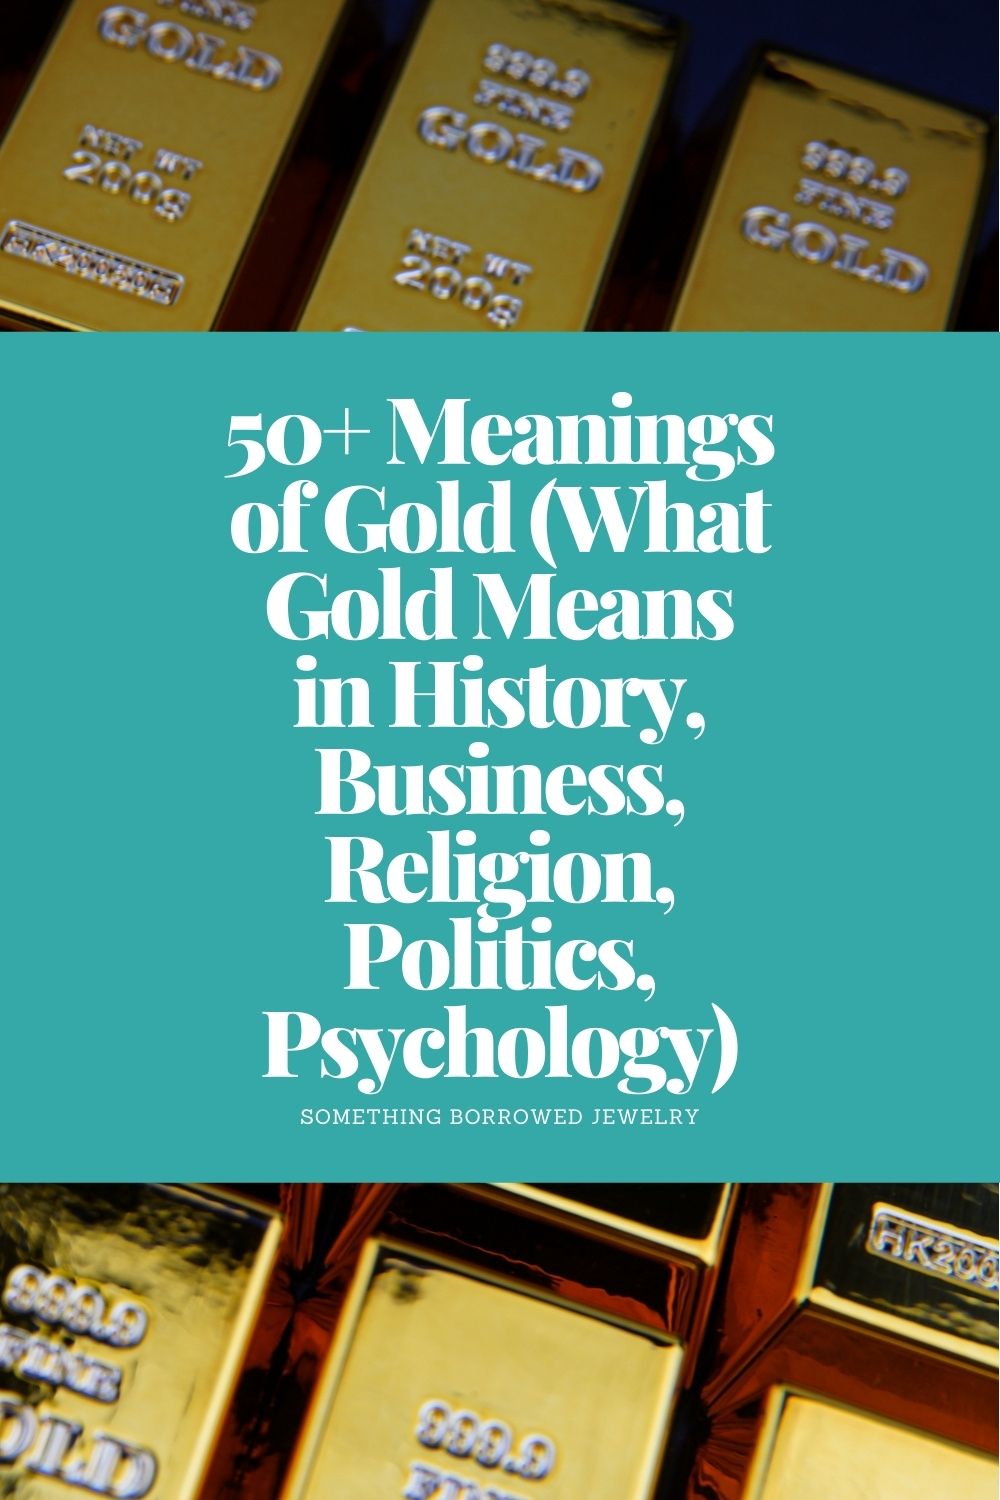 50+ Meanings of Gold (What Gold Means in History, Business, Religion, Politics, Psychology) pin 2